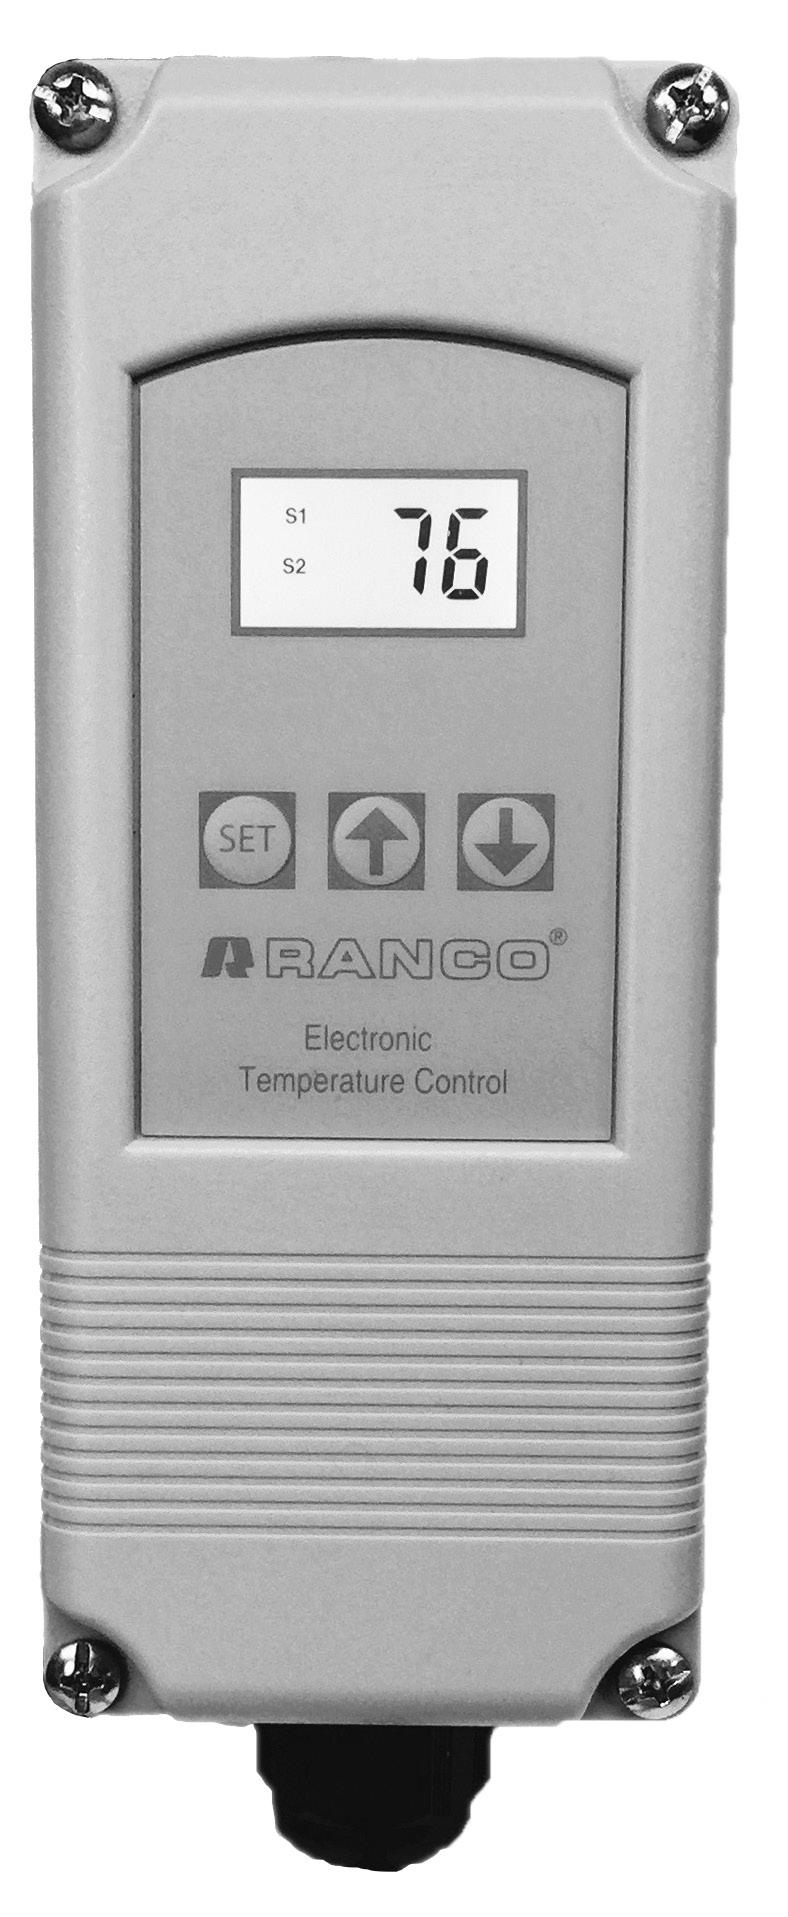 INSTALLATION DATA ETC TWO STAGE ELECTRONIC TEMPERATURE CONTROL The Ranco ETC is a microprocessor based family of electronic temperature controls, designed to provide on/off control for commercial